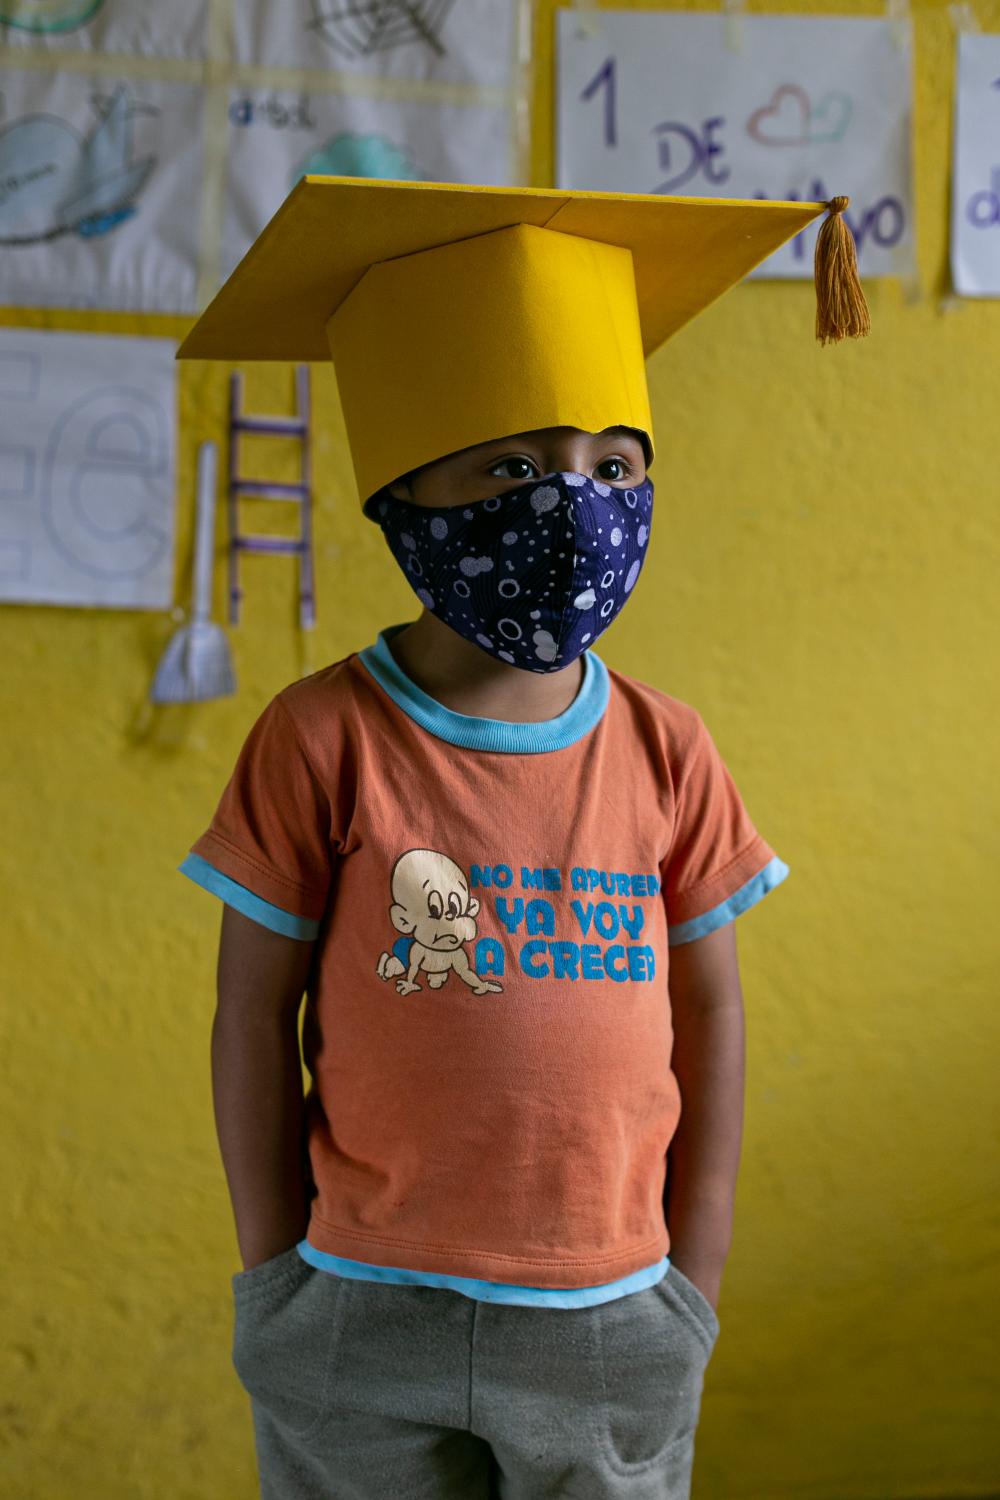 Education through Whatsapp  - Gael Pin (4) wears the cap and mask he will use at the...